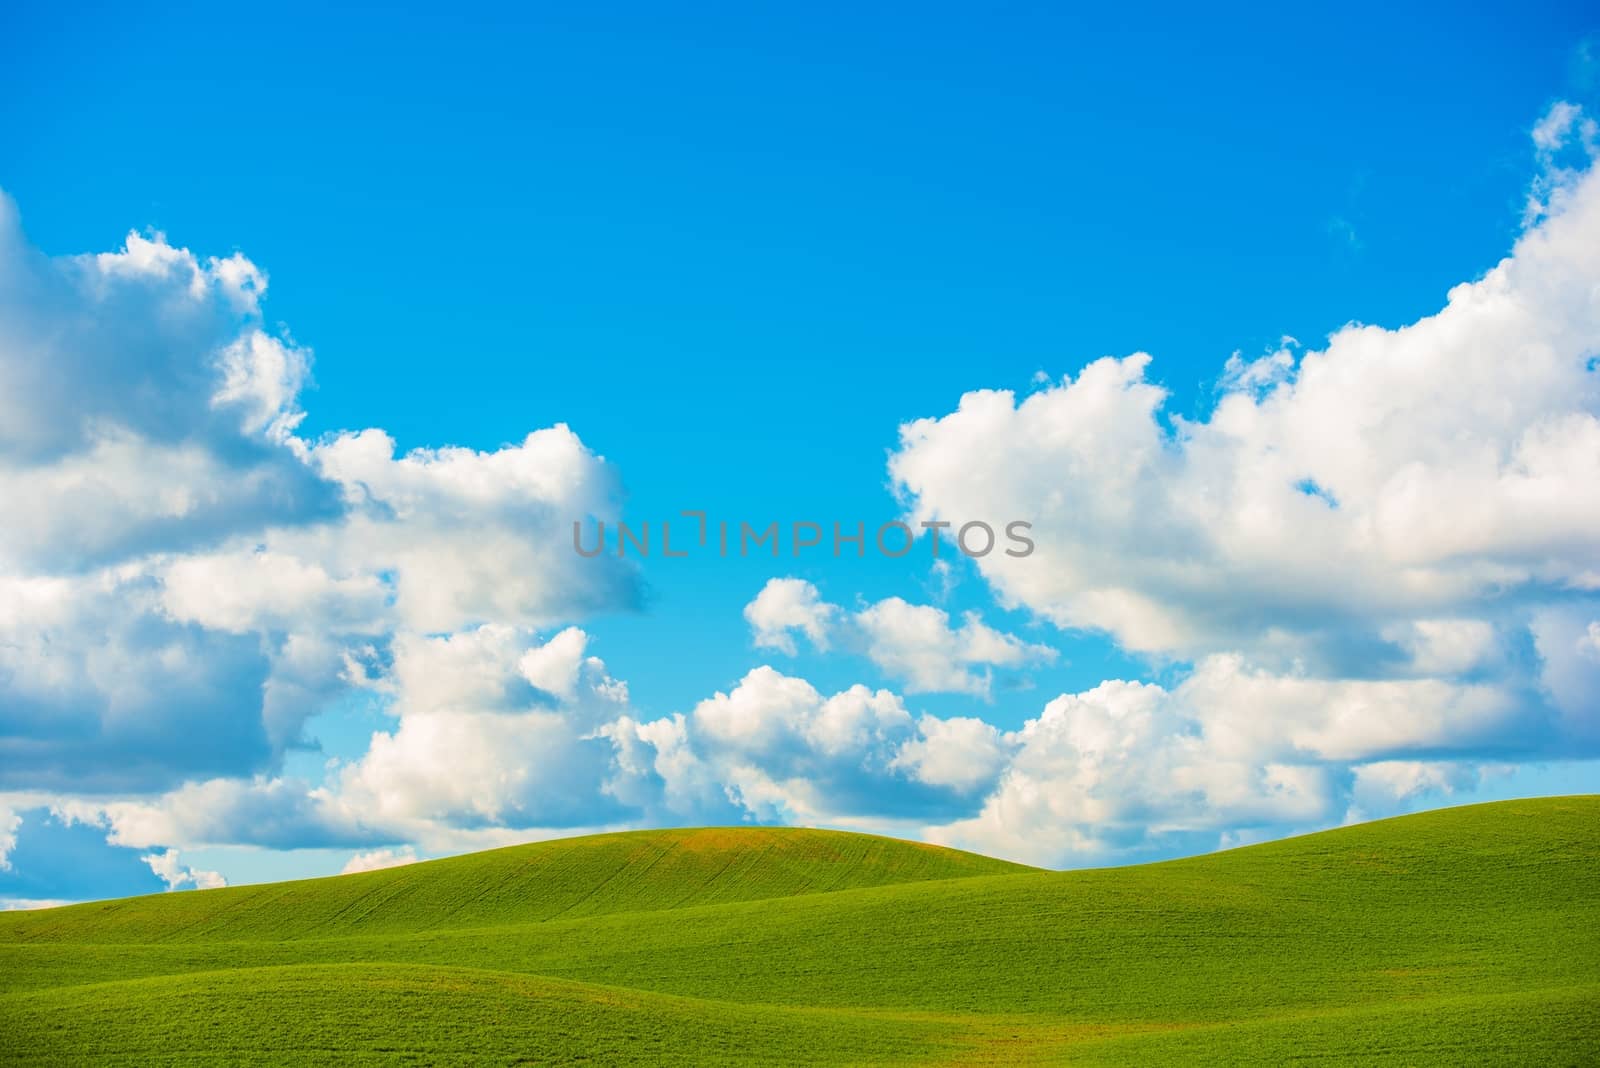 Scenic Meadow Photo Background. Green Beautiful Meadow Buttes and the Cloudy Blue Sky Photo Backdrop. 